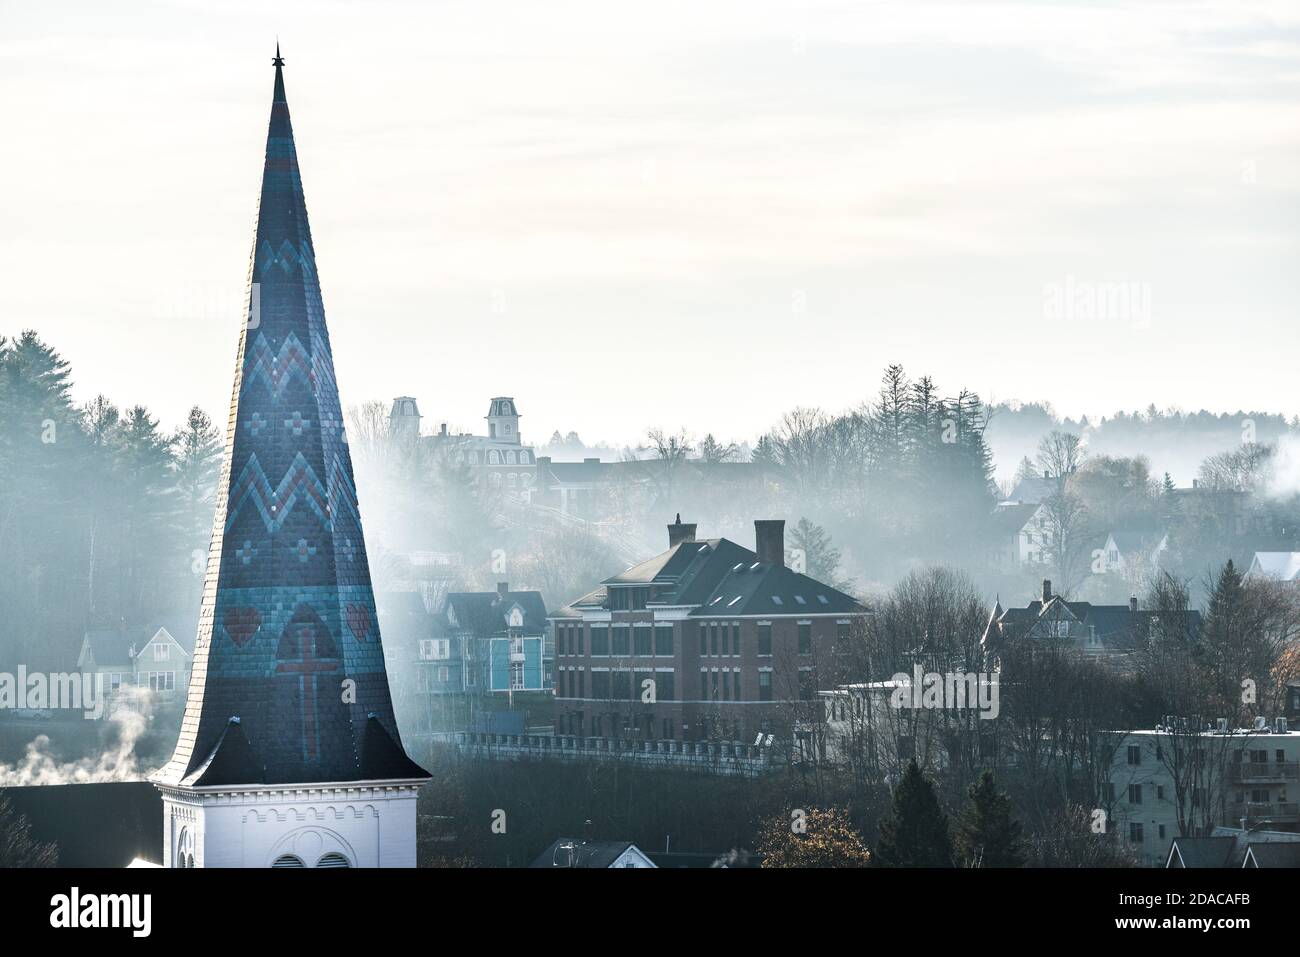 Steeples, towers, roofs and chimneys of Montpelier, capital of the state of Vermont, New England, USA. Stock Photo